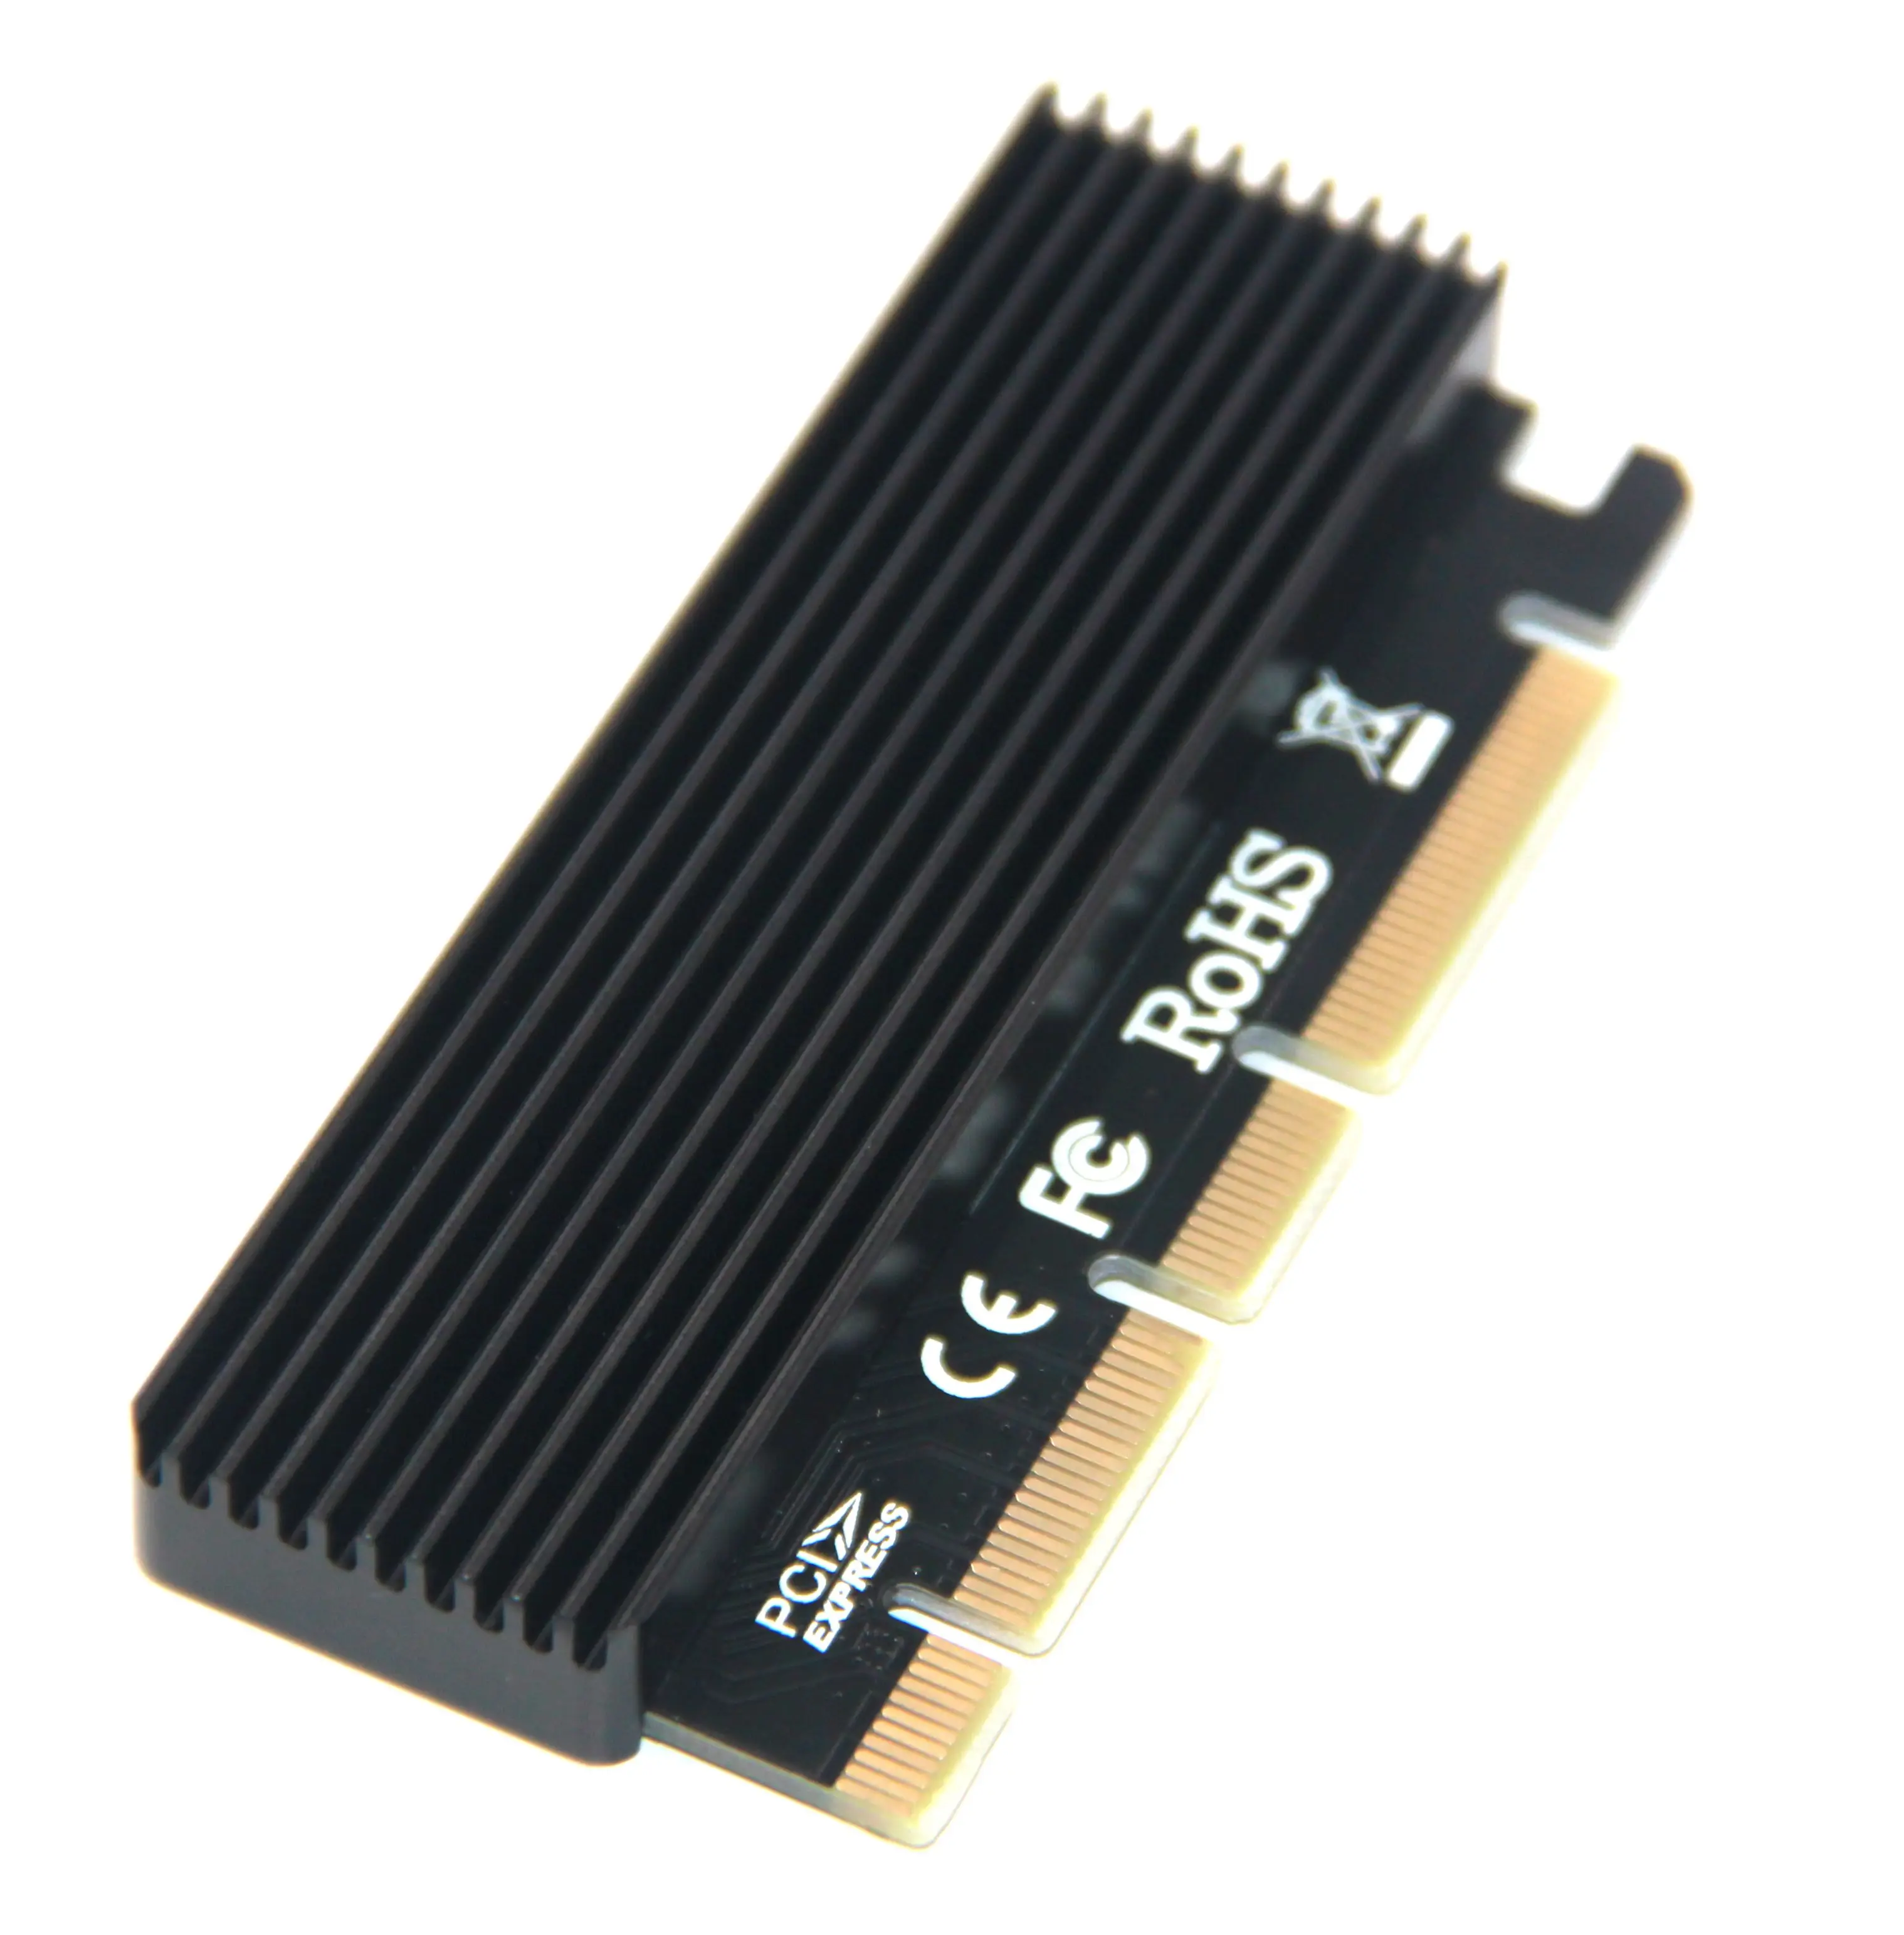 

M.2 Nvme Ssd Ngff to Pcie 3.0 X16 Adapter M Key Interface Card Full Speed